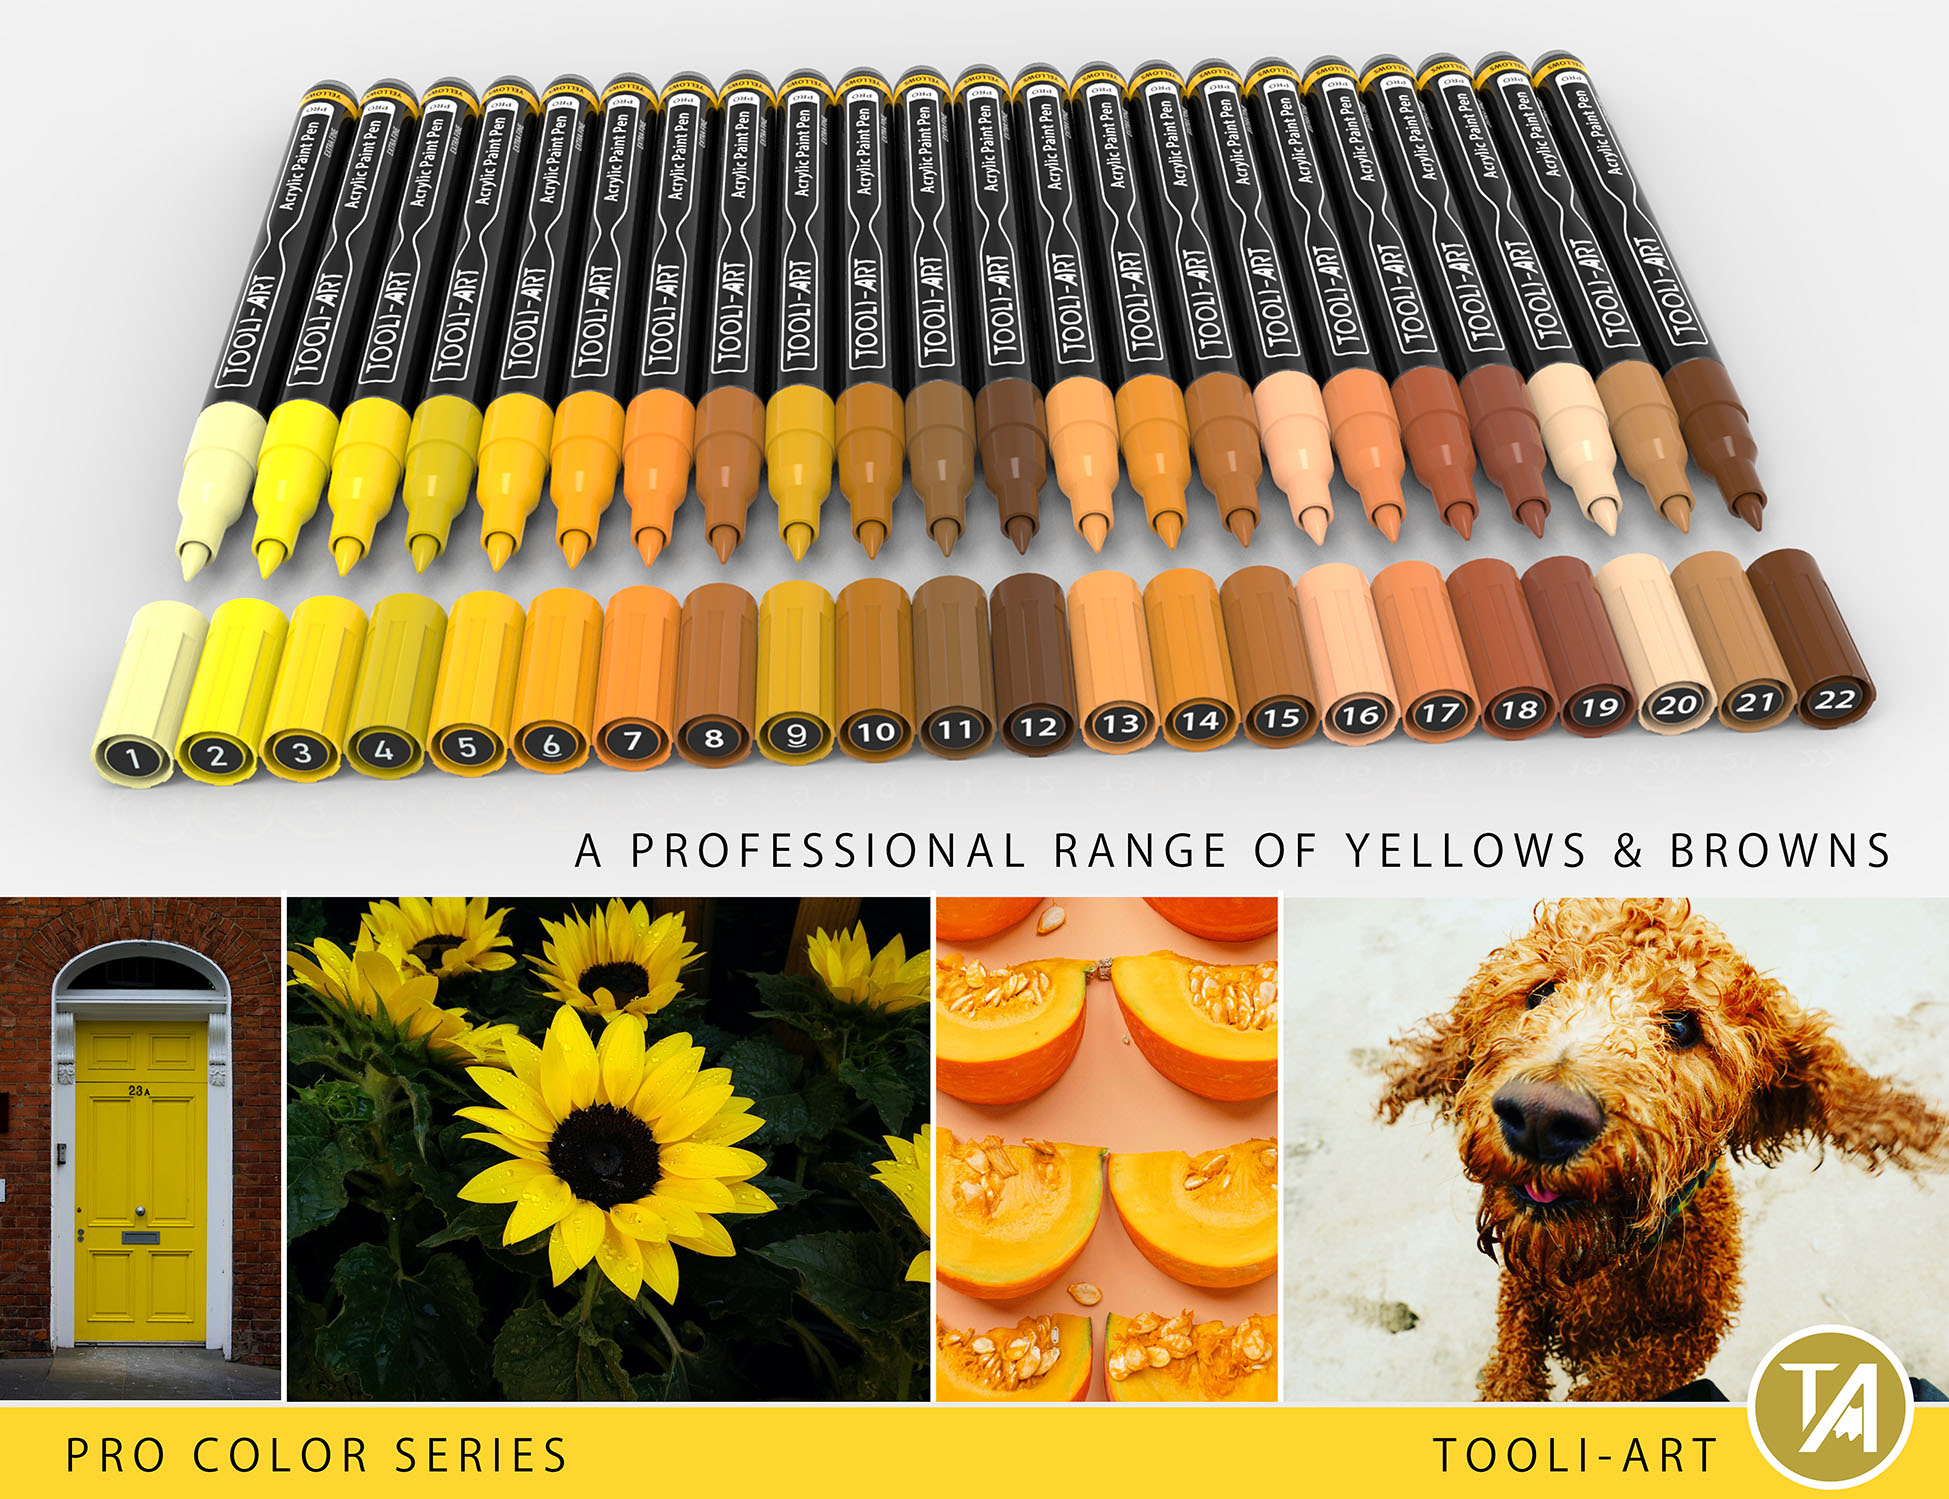 Acrylic Paint Pens 22 Assorted Yellow/Brown Pro Color Series Markers Set 0.7mm Extra Fine Tip for Rock Painting, Glass, Mugs, Wood, Metal, Canvas, DIY